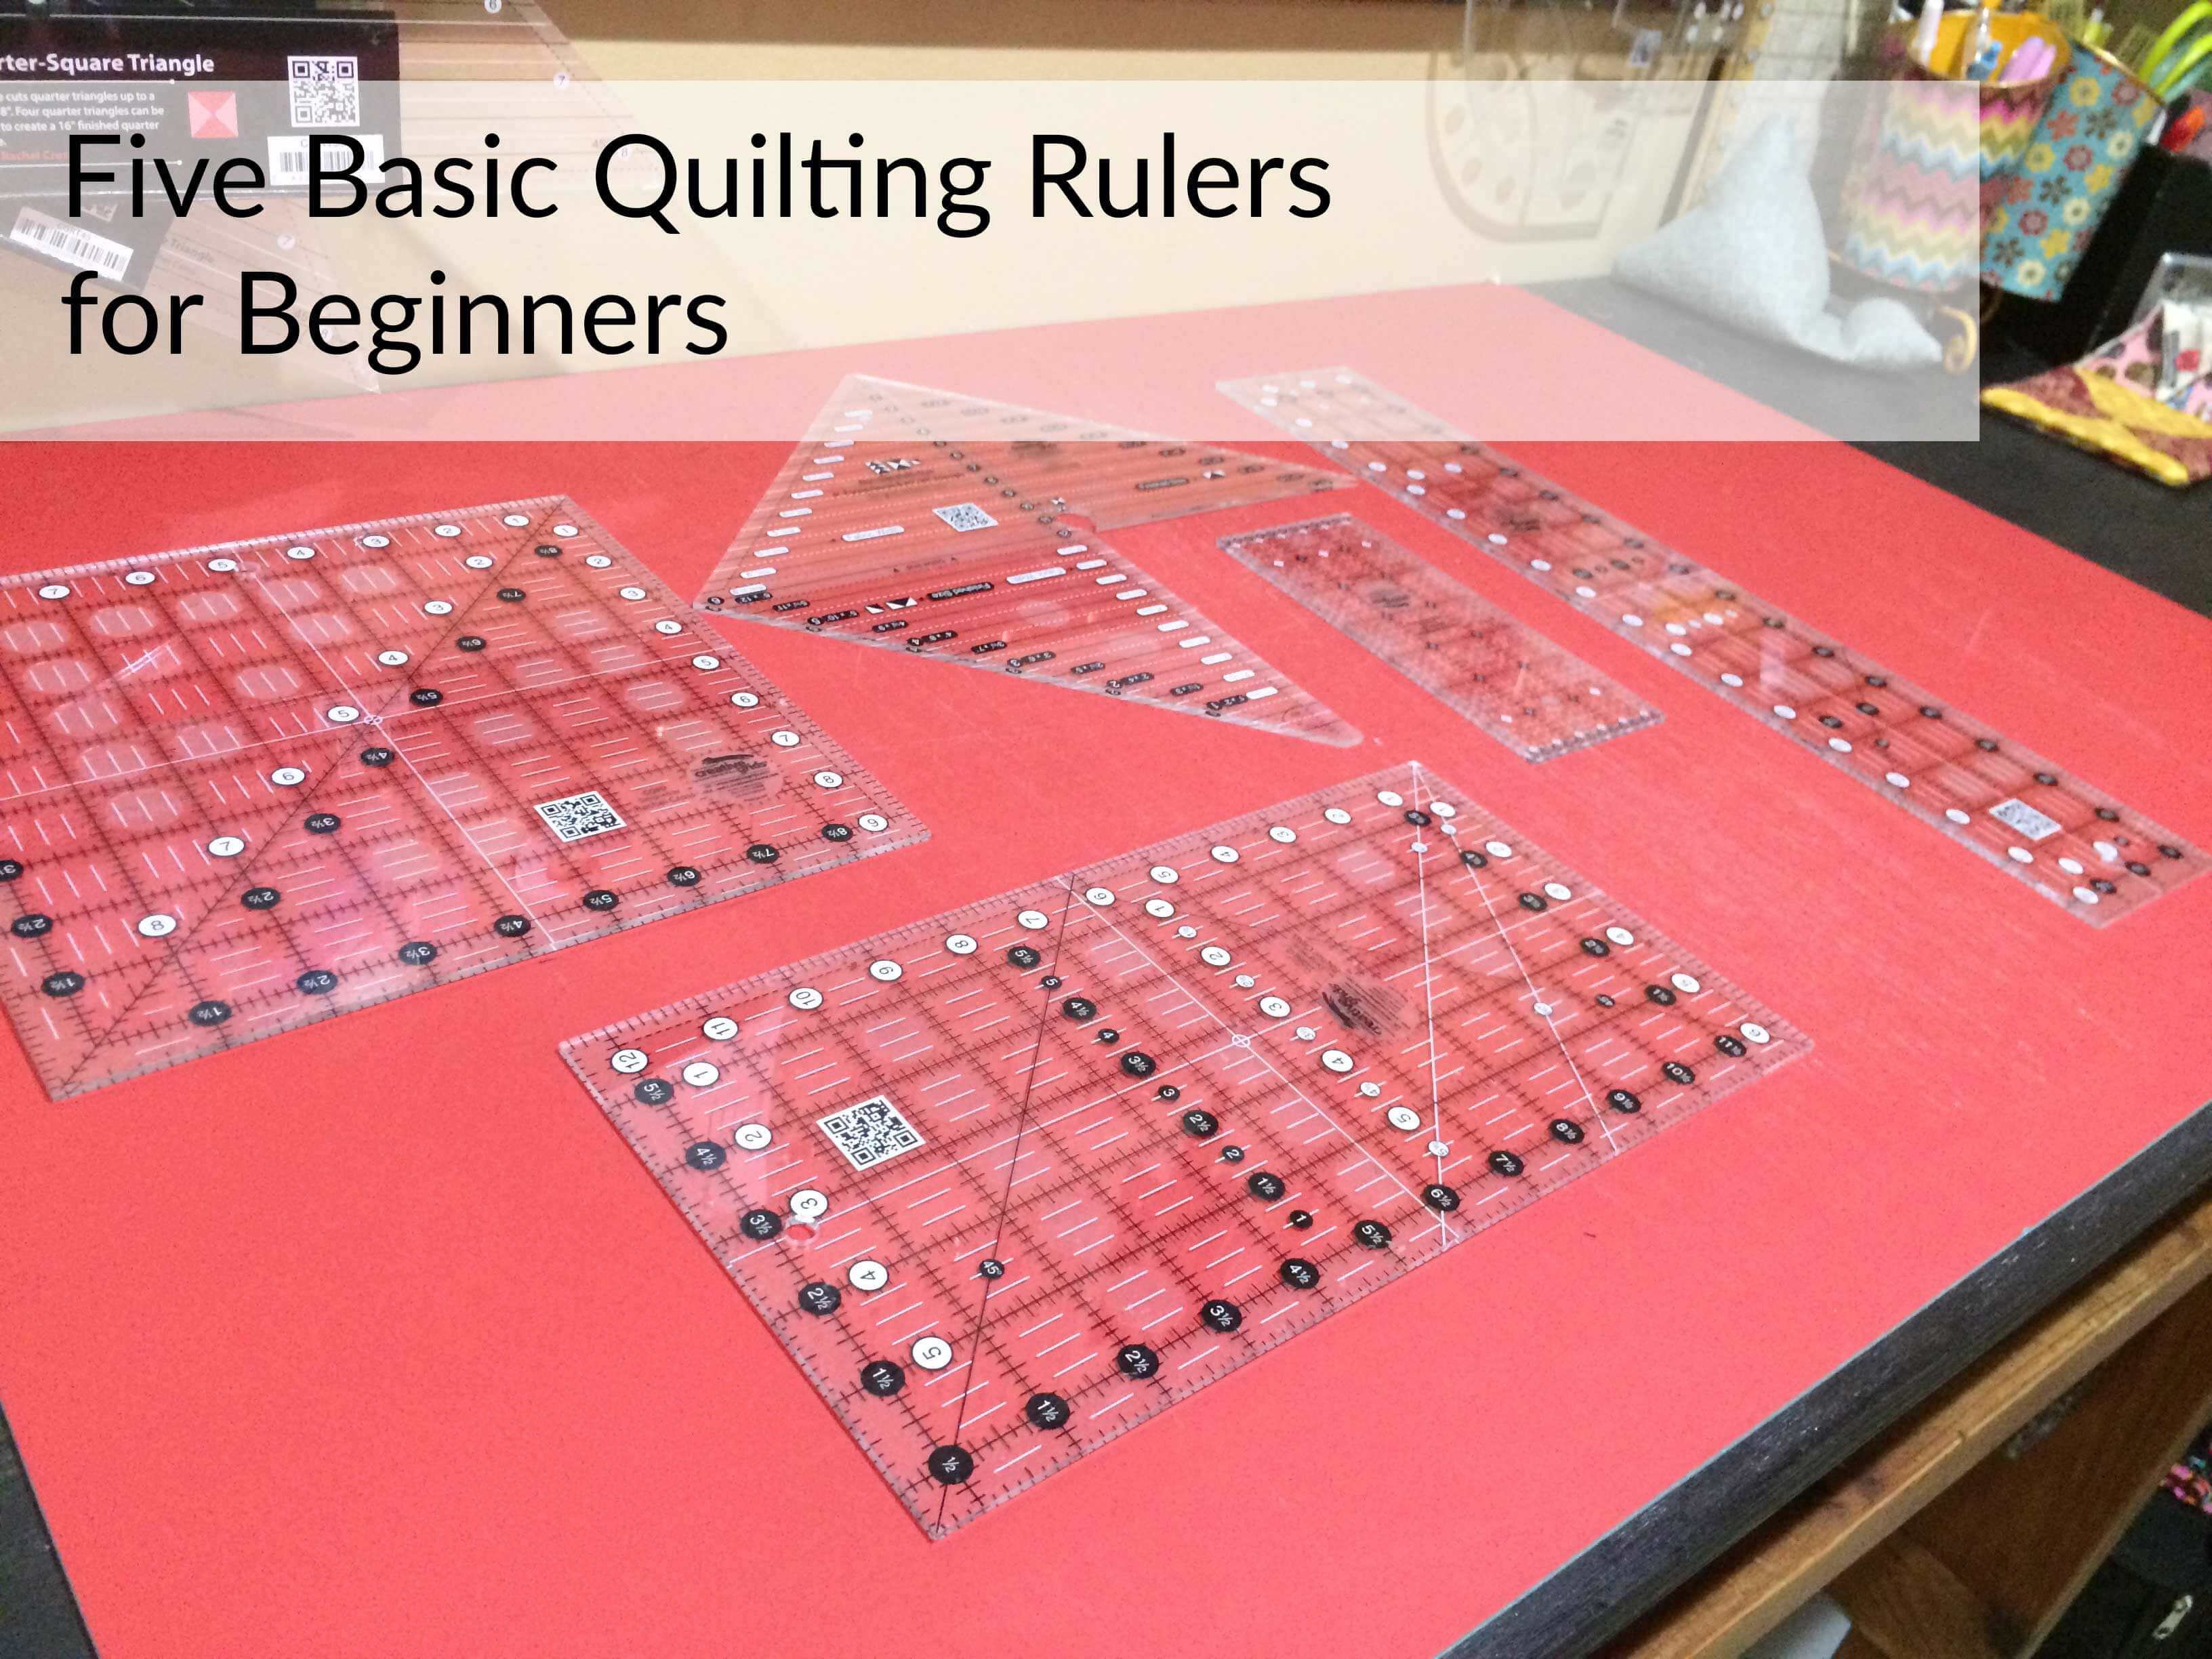 Top Five Basic Quilting Rulers for Beginners